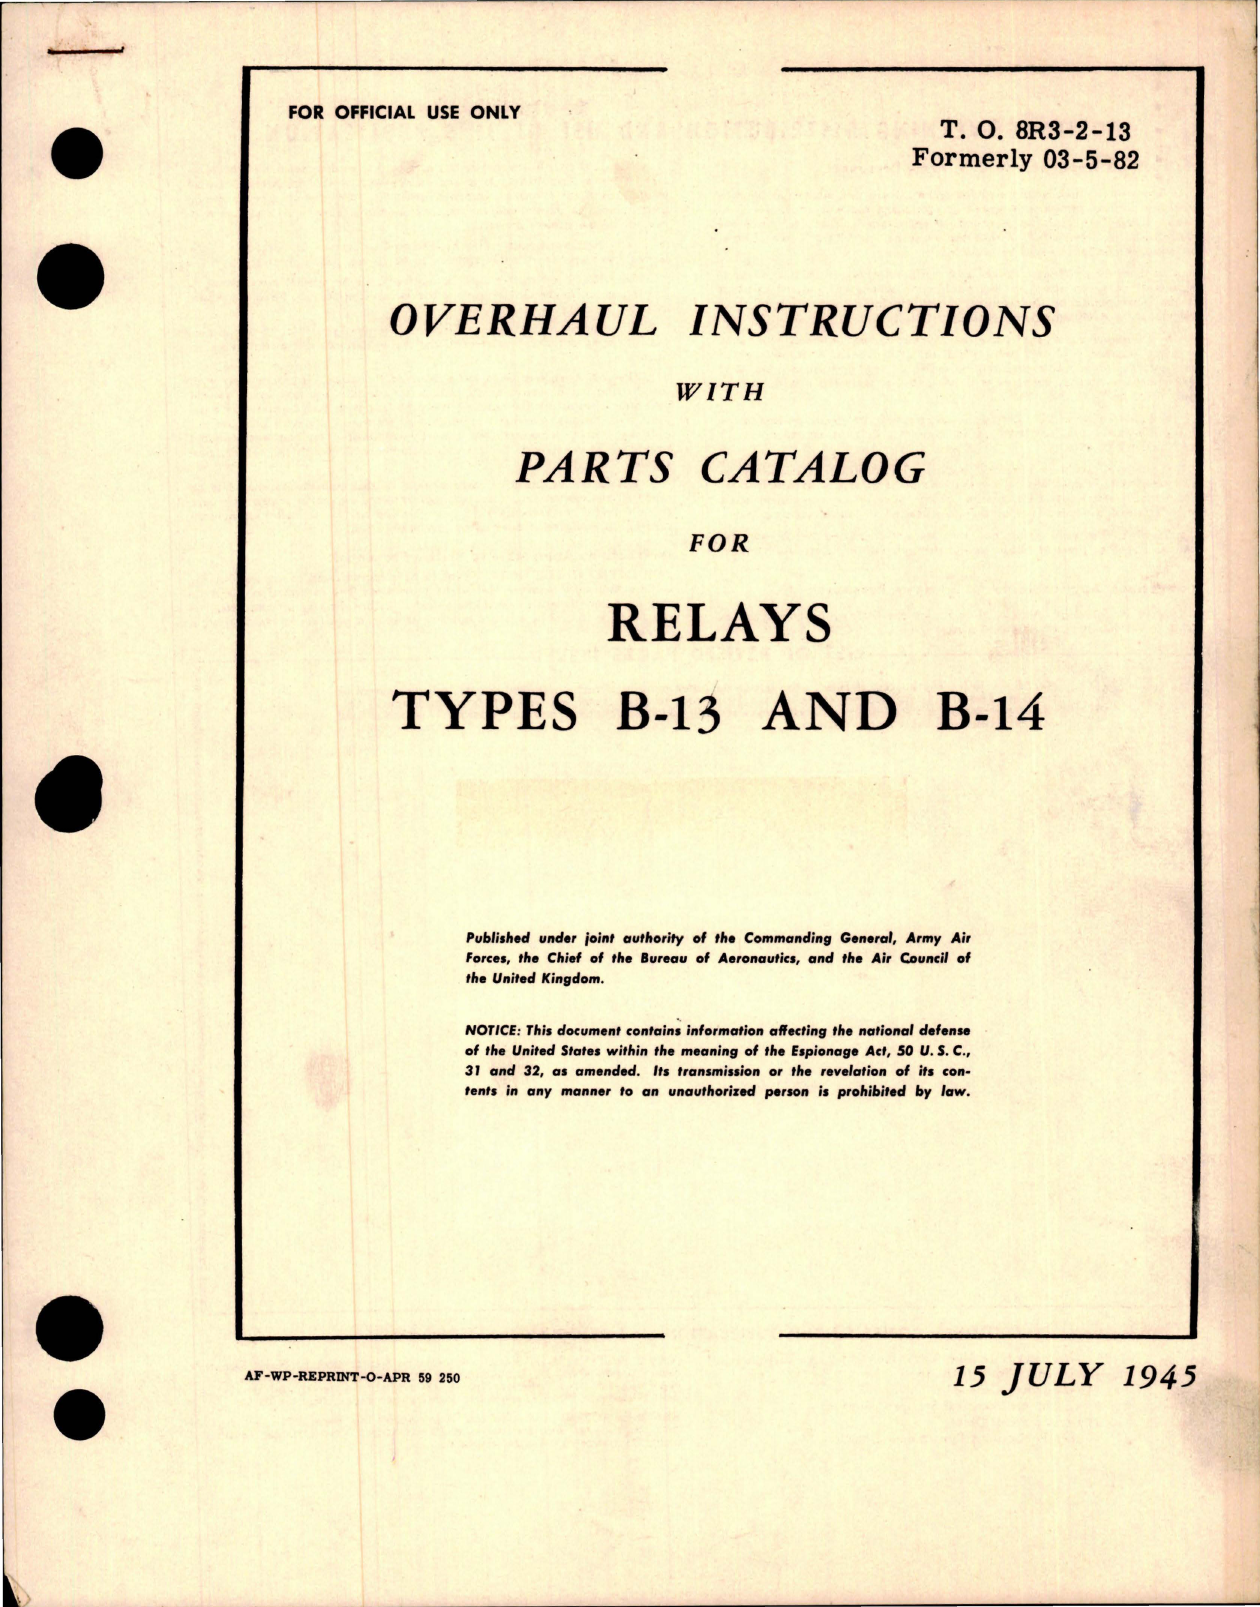 Sample page 1 from AirCorps Library document: Overhaul Instructions with Parts for Relays - Types B-13 and B-14 